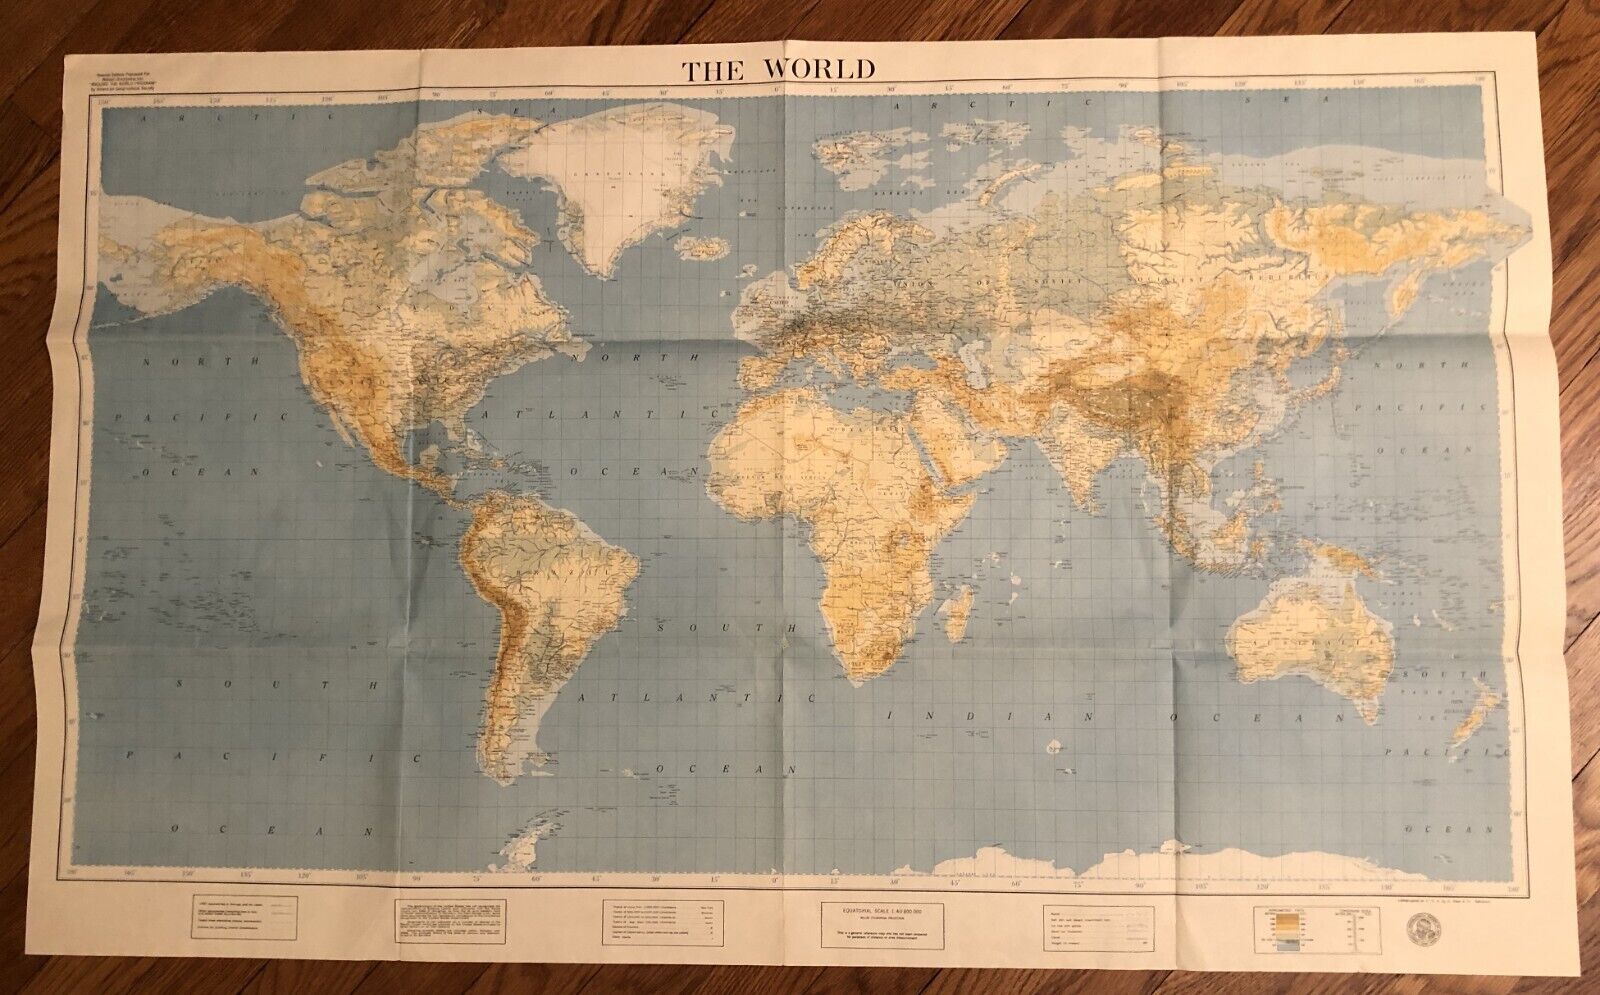 1937 Map – Nelson Doubleday Inc. “Around the World Program” Map, Good Condition